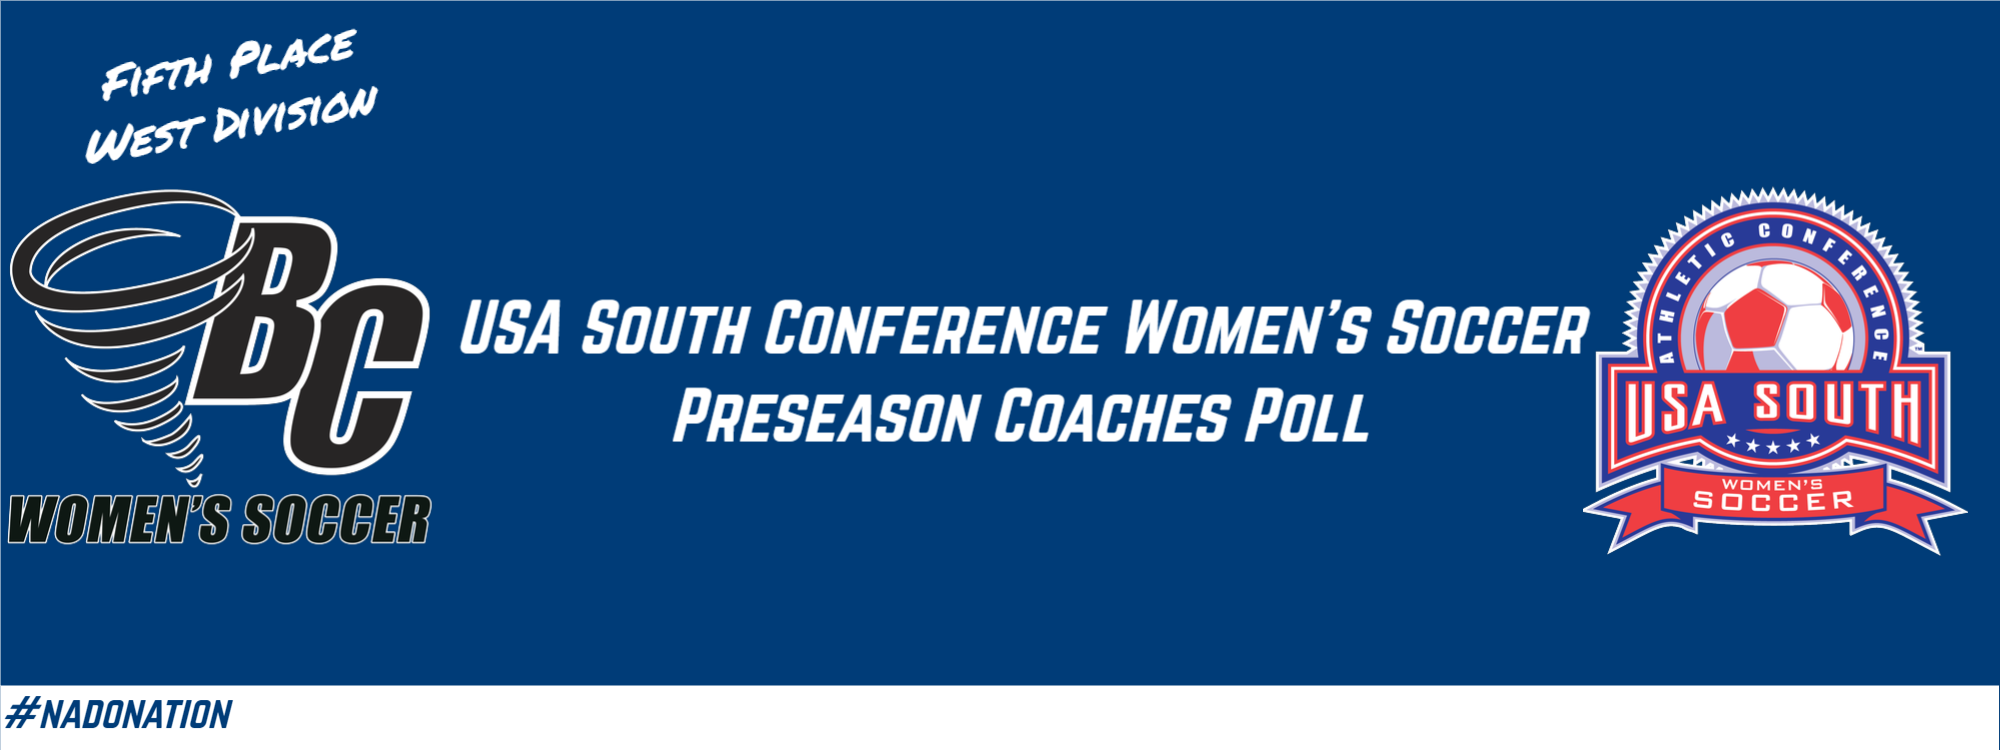 Coaches Pick Brevard Fifth in West Division Preseason Poll